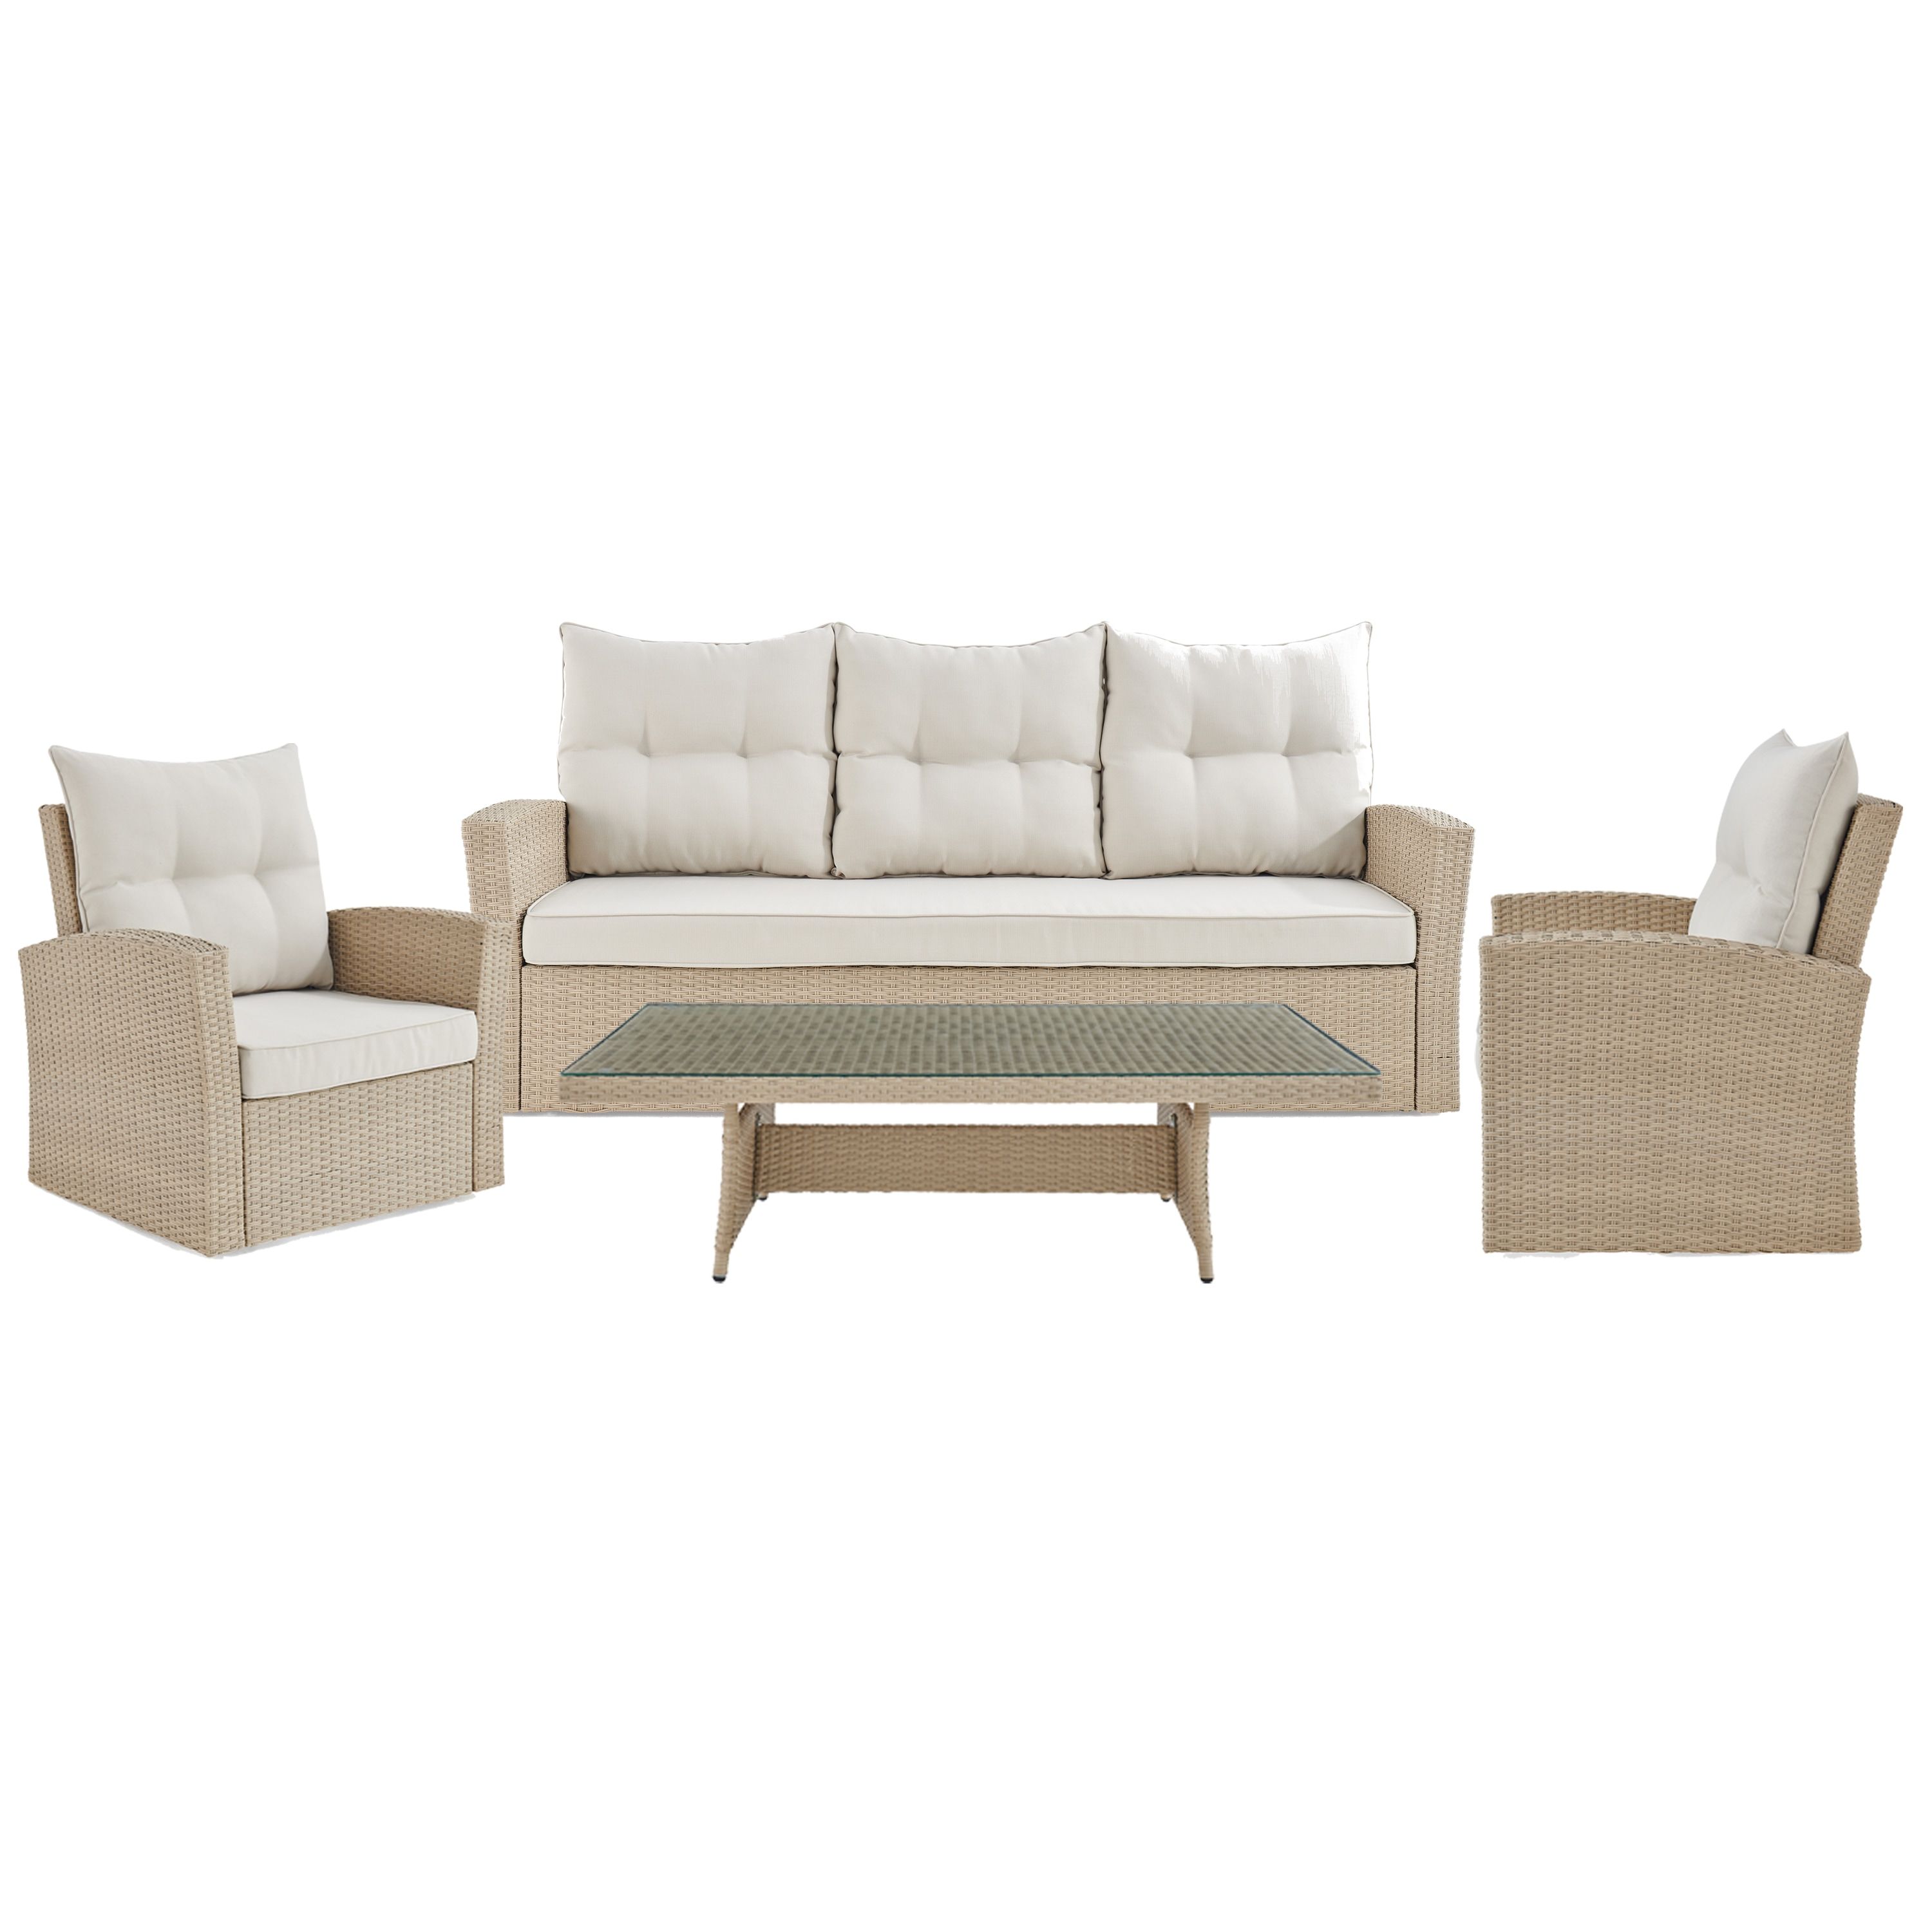 4-Piece Wicker Patio Conversation Set with Cushions